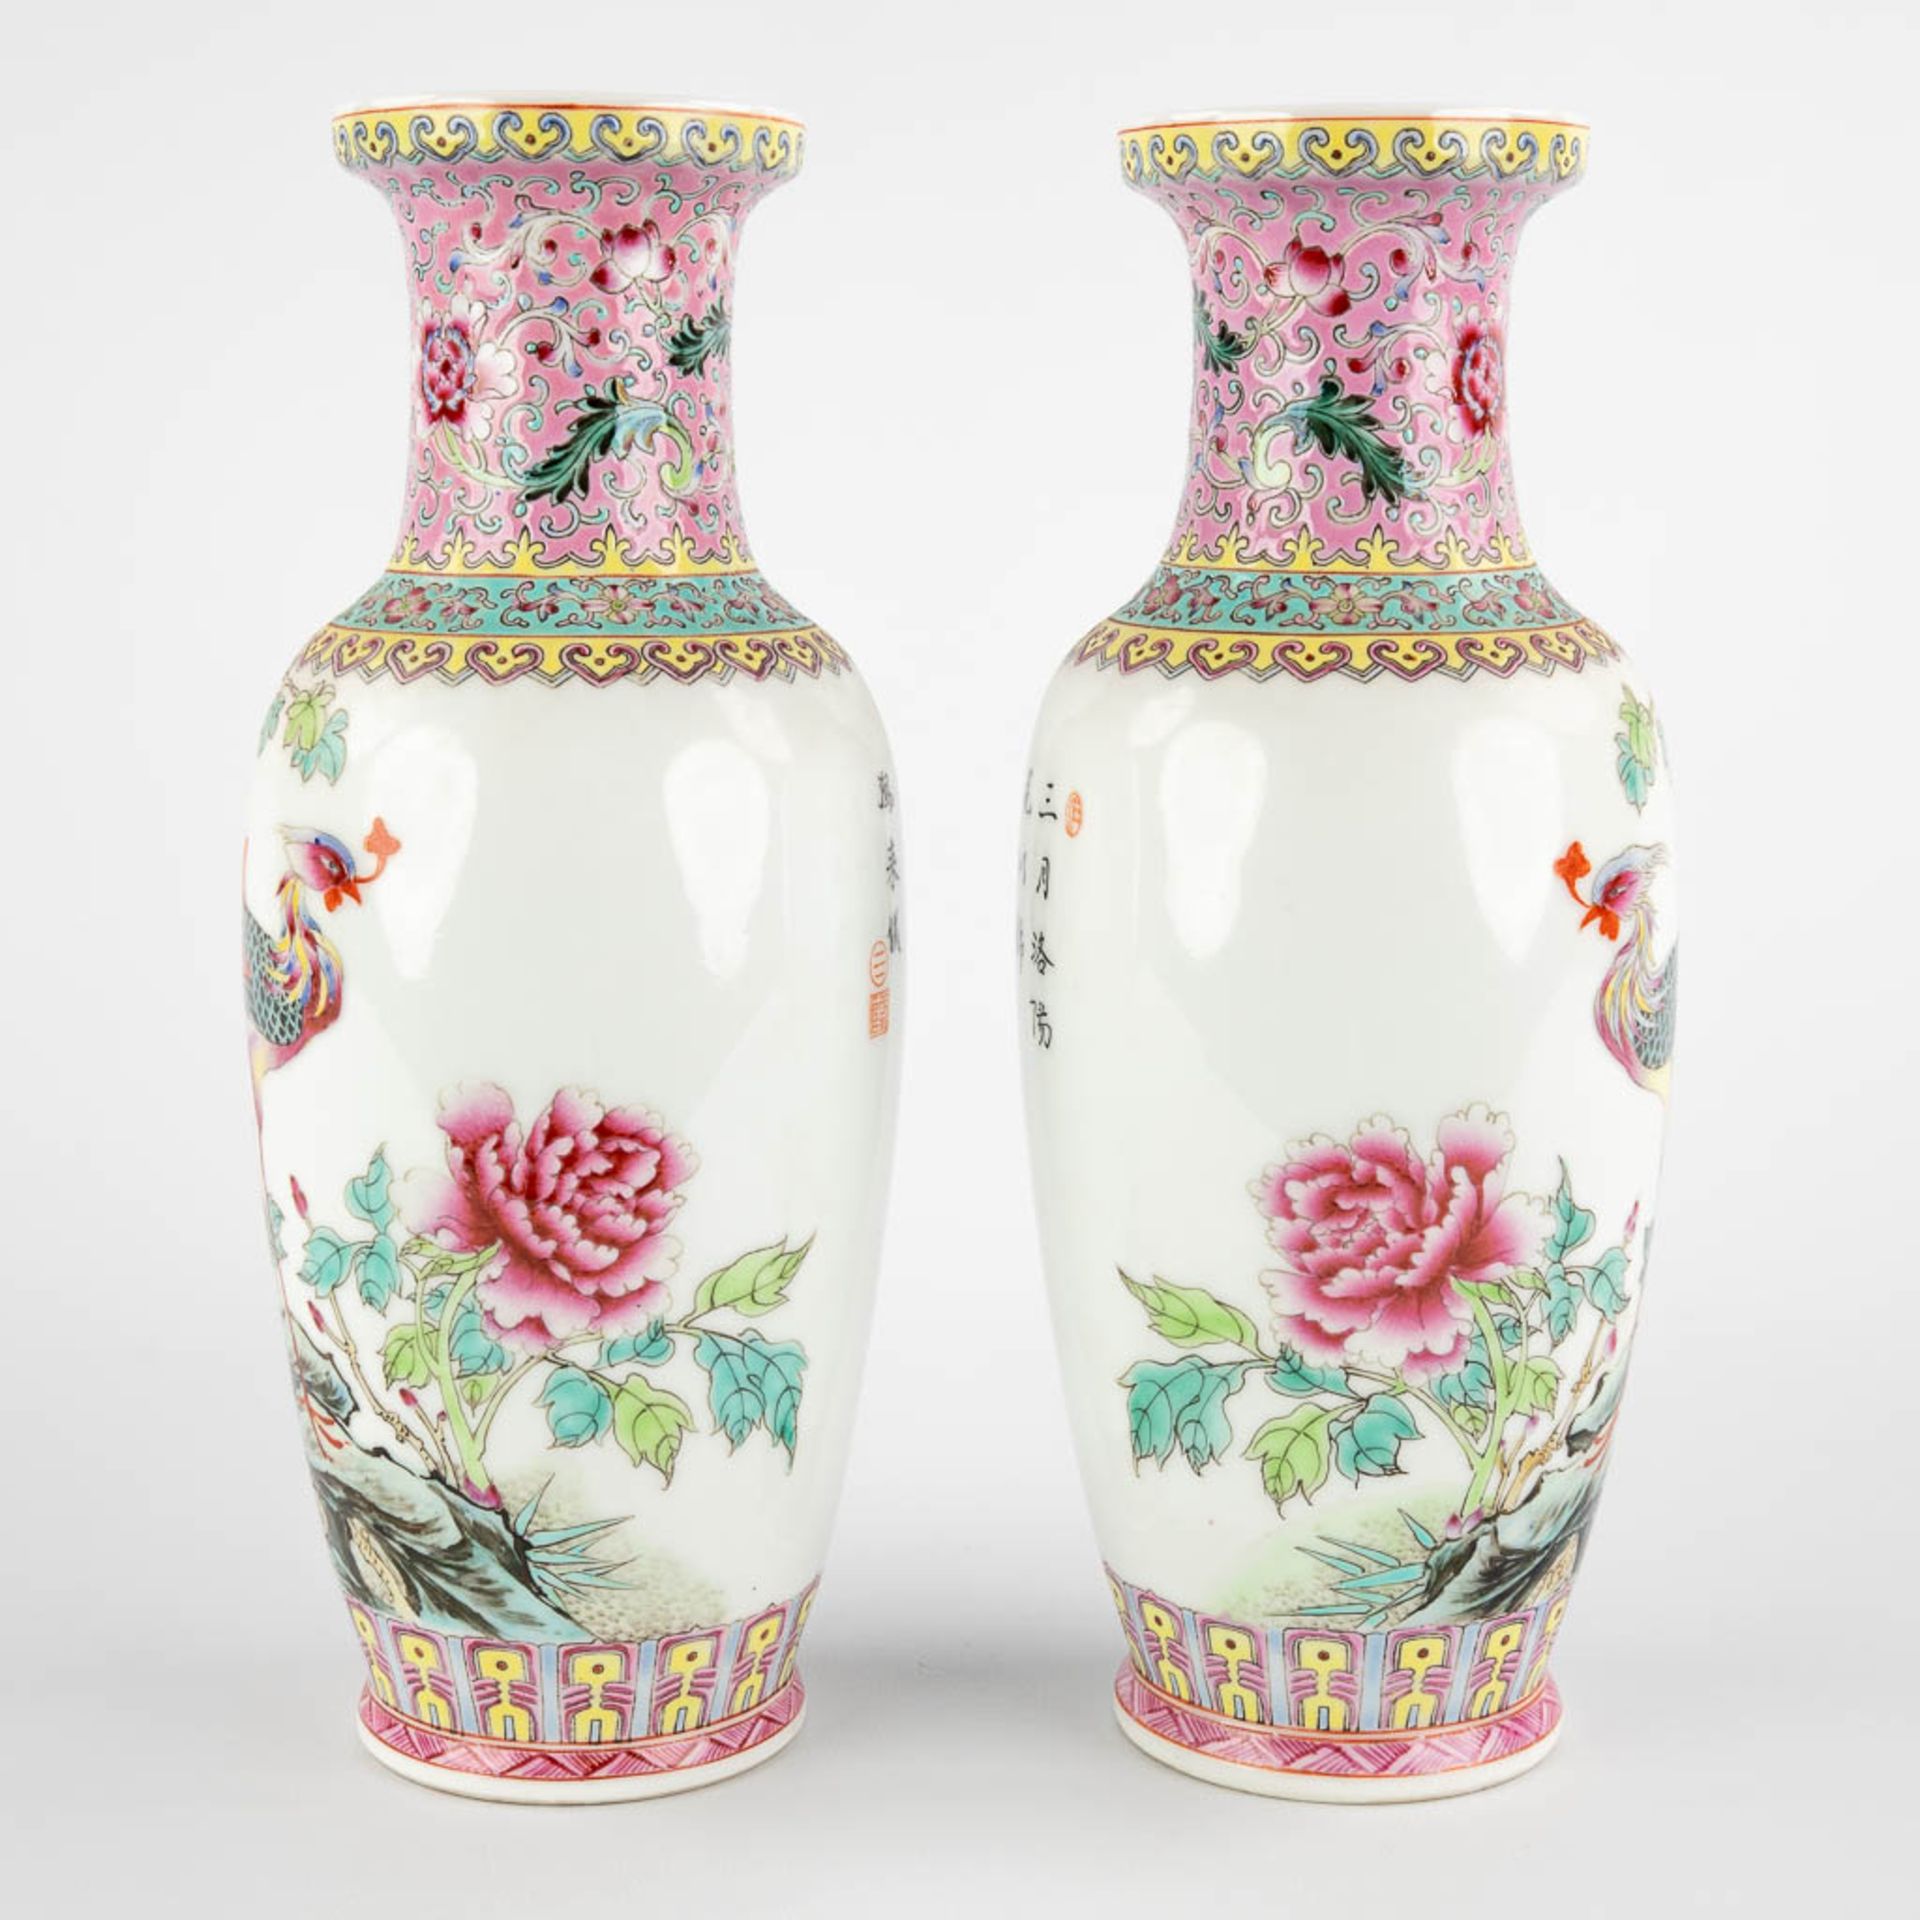 A pair of Chinese vases with fine decor of Phoenixes. 20th C. (H:26 x D:10 cm) - Image 3 of 10